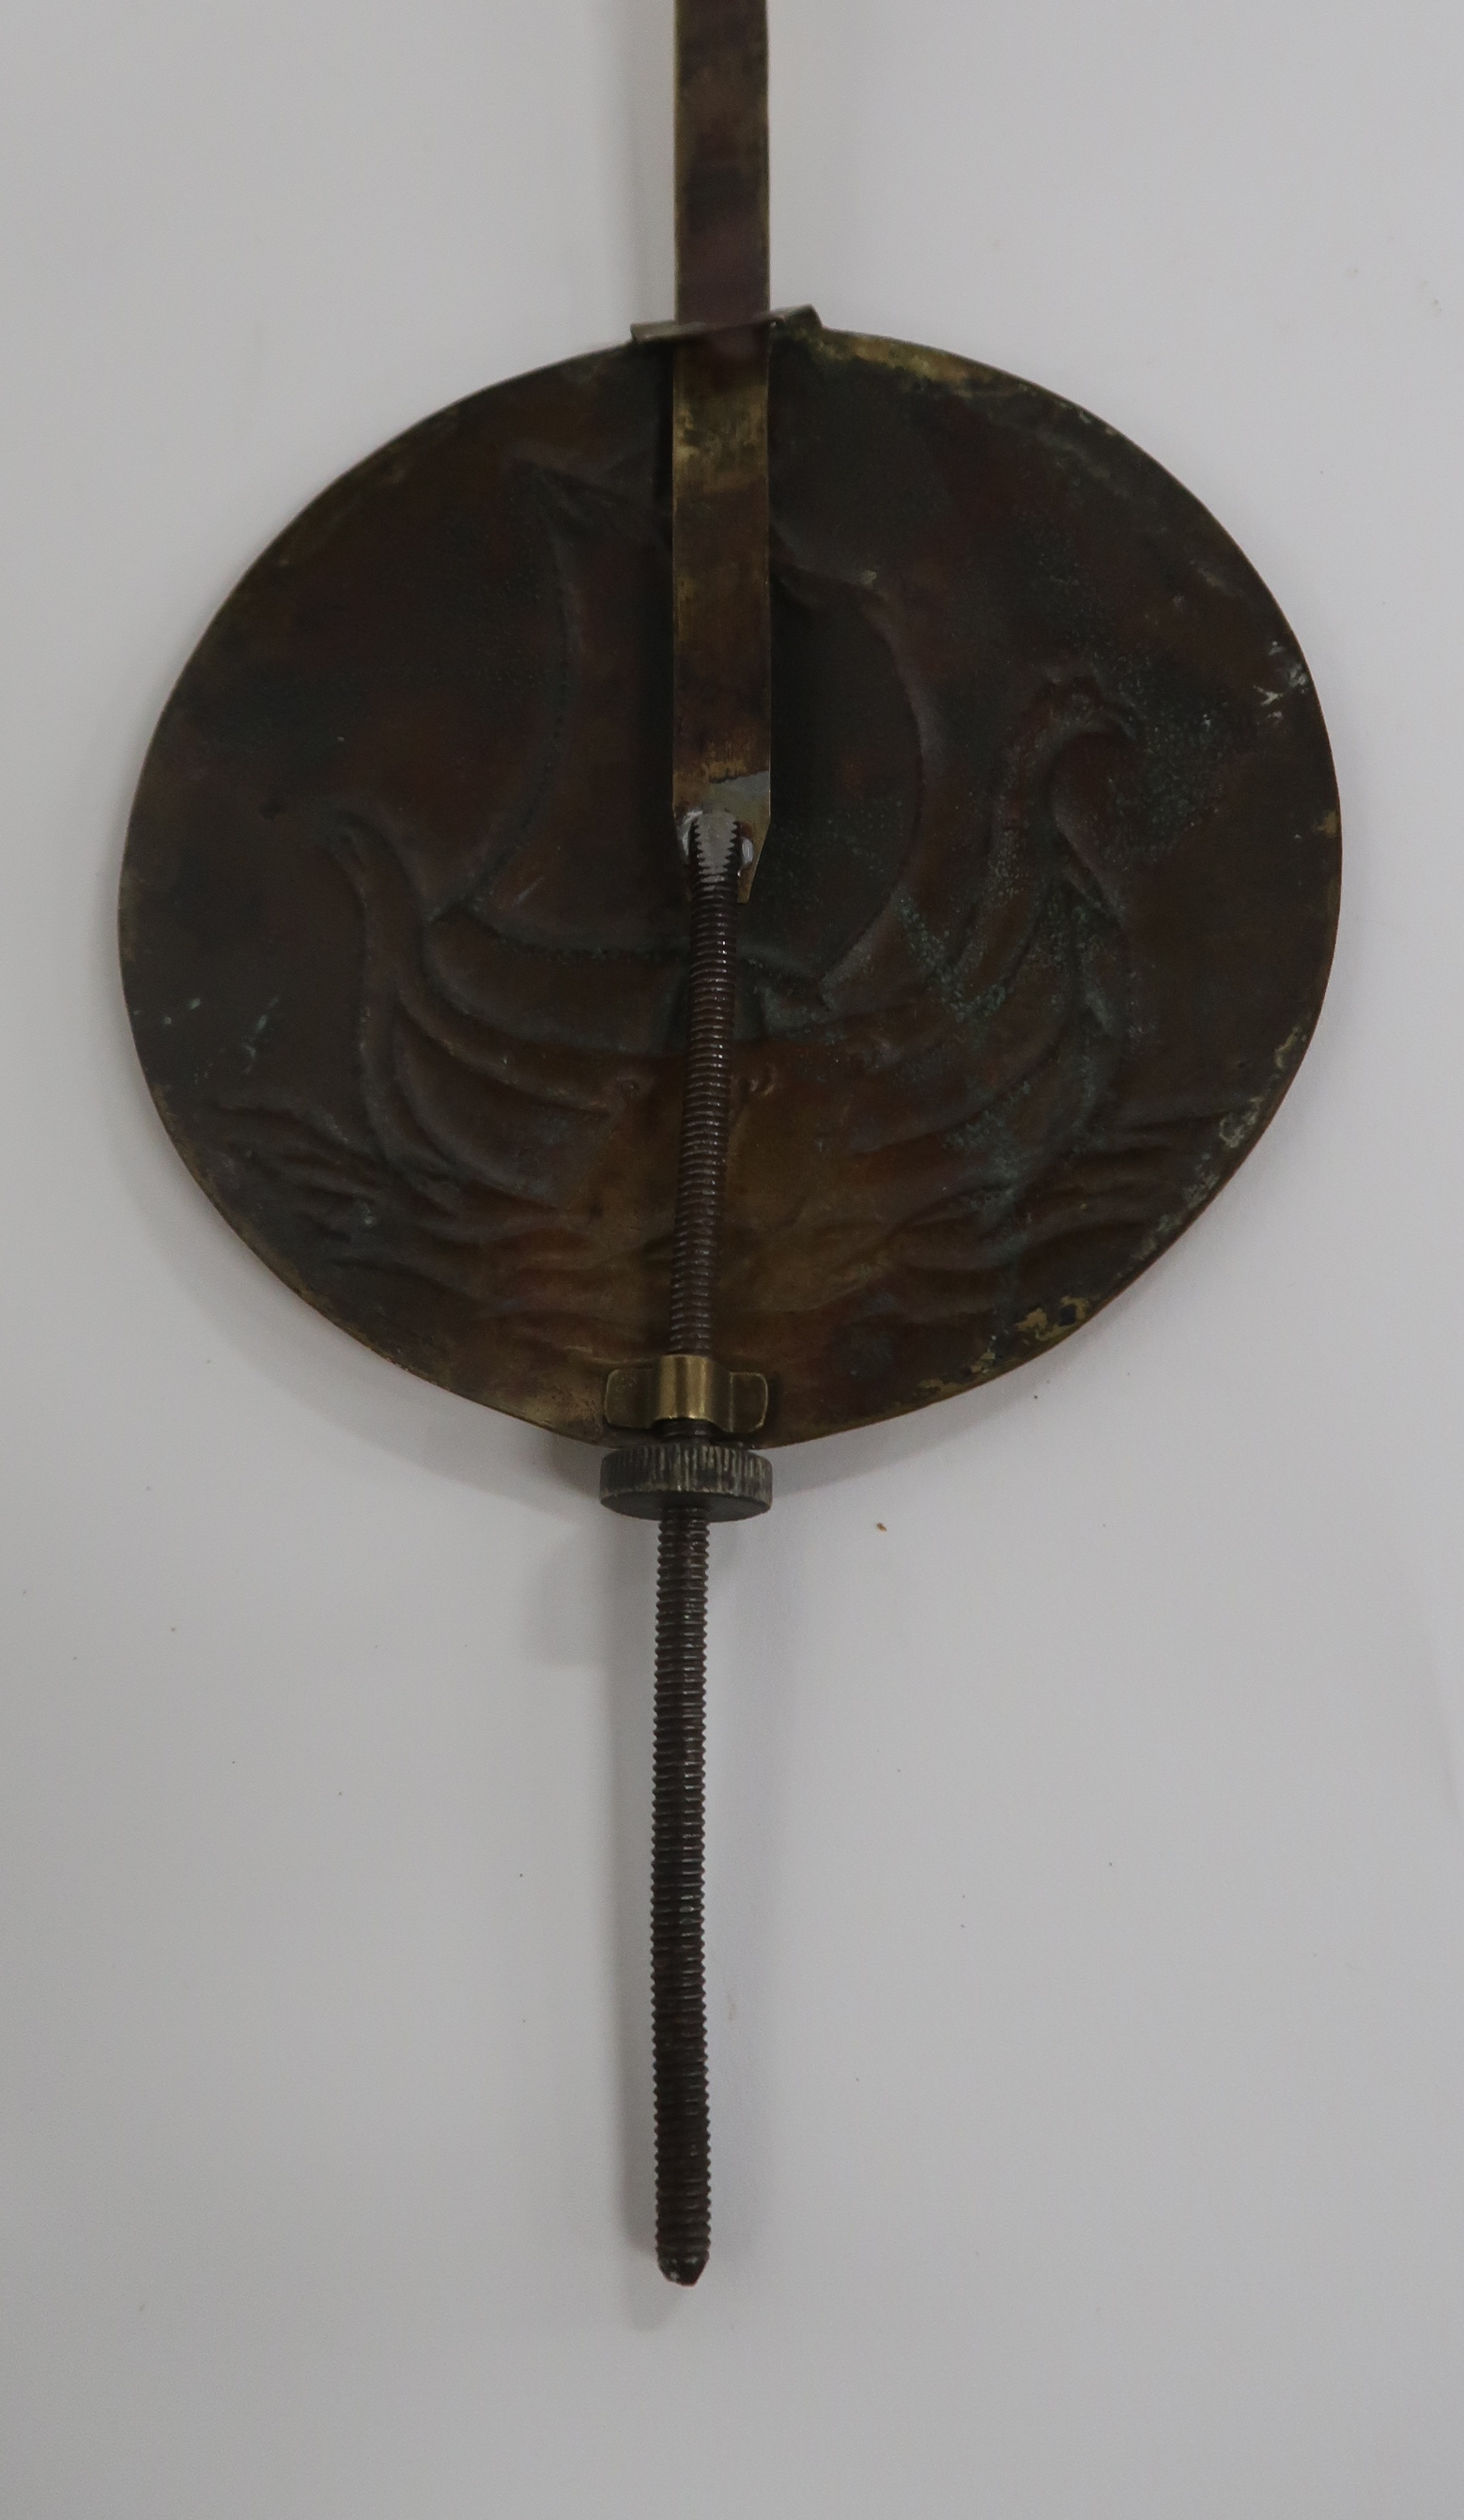 A BRASS ARTS AND CRAFTS WAG AT THE WA CLOCK with Celtic knotwork design, pendulum and weights - Image 8 of 8